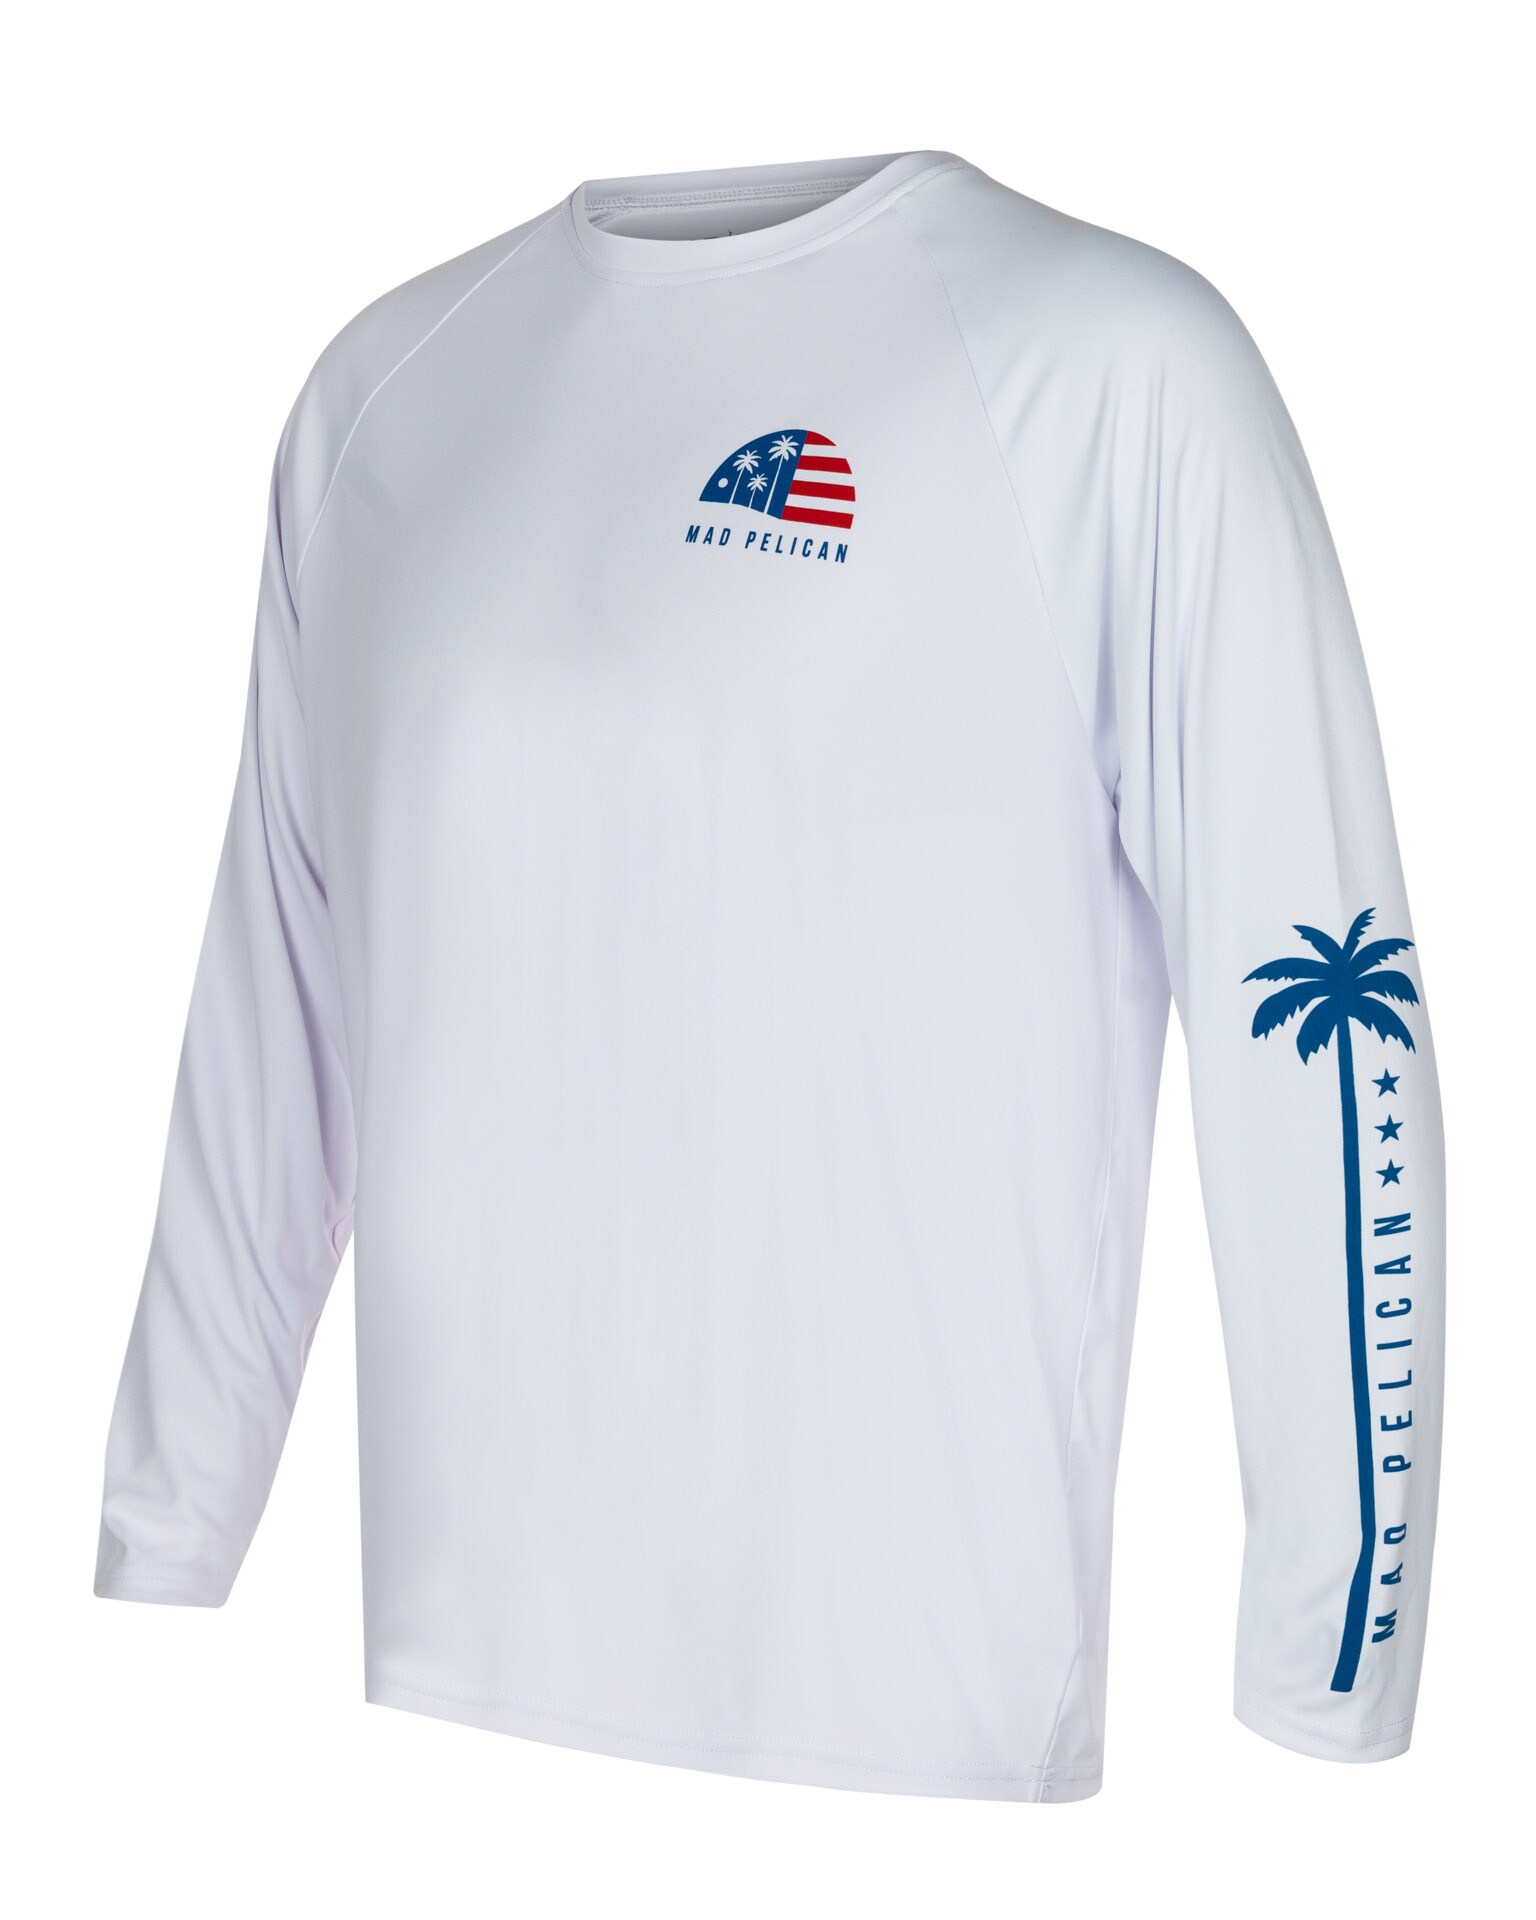 Mad Pelican Men's Long Sleeve Graphic T-shirt (Large) in the Tops & Shirts  department at